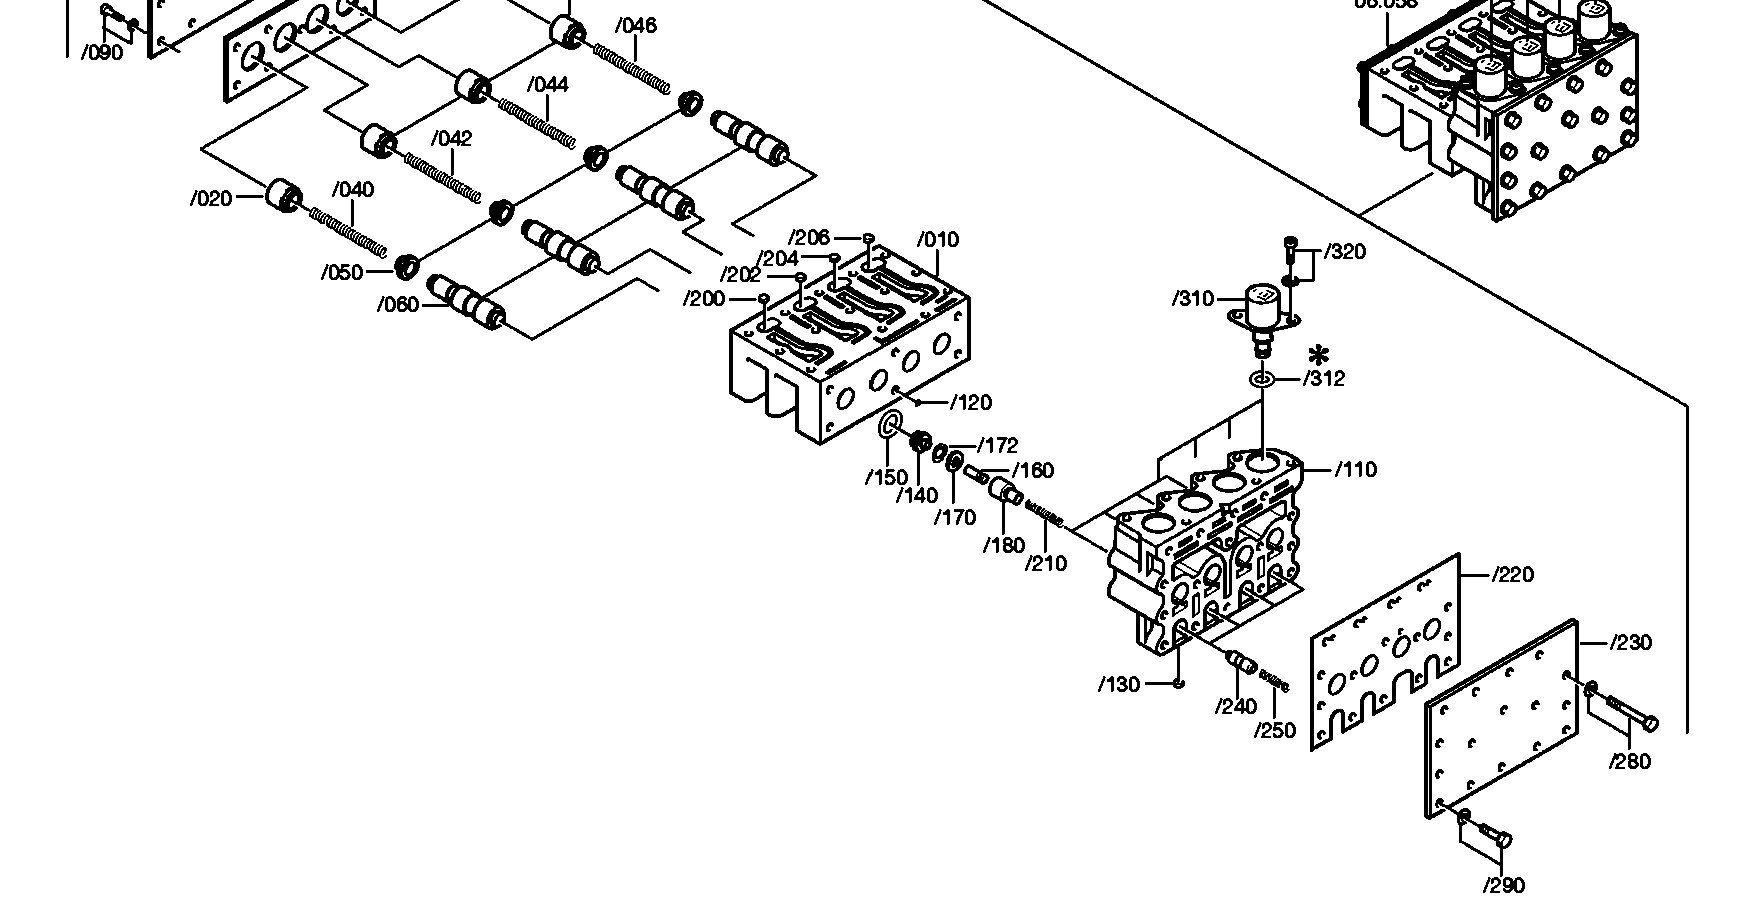 drawing for DAF 1291499 - WIRING HARNESS (figure 4)